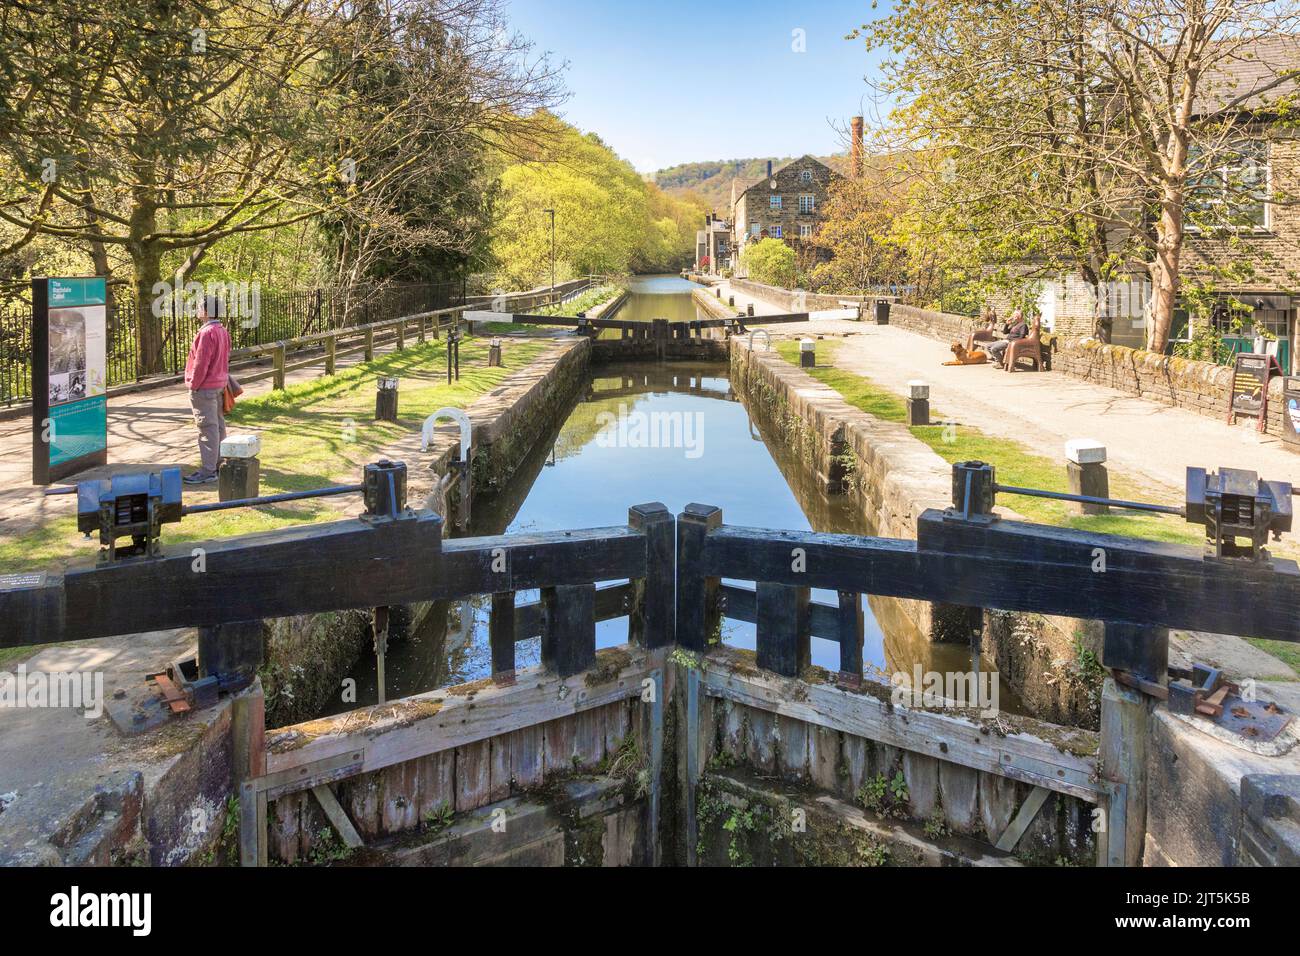 29 April 2022: Hebden Bridge, West Yorkshire, UK - A view along the Rochdale Canal, with locks, people, sunshine. Stock Photo